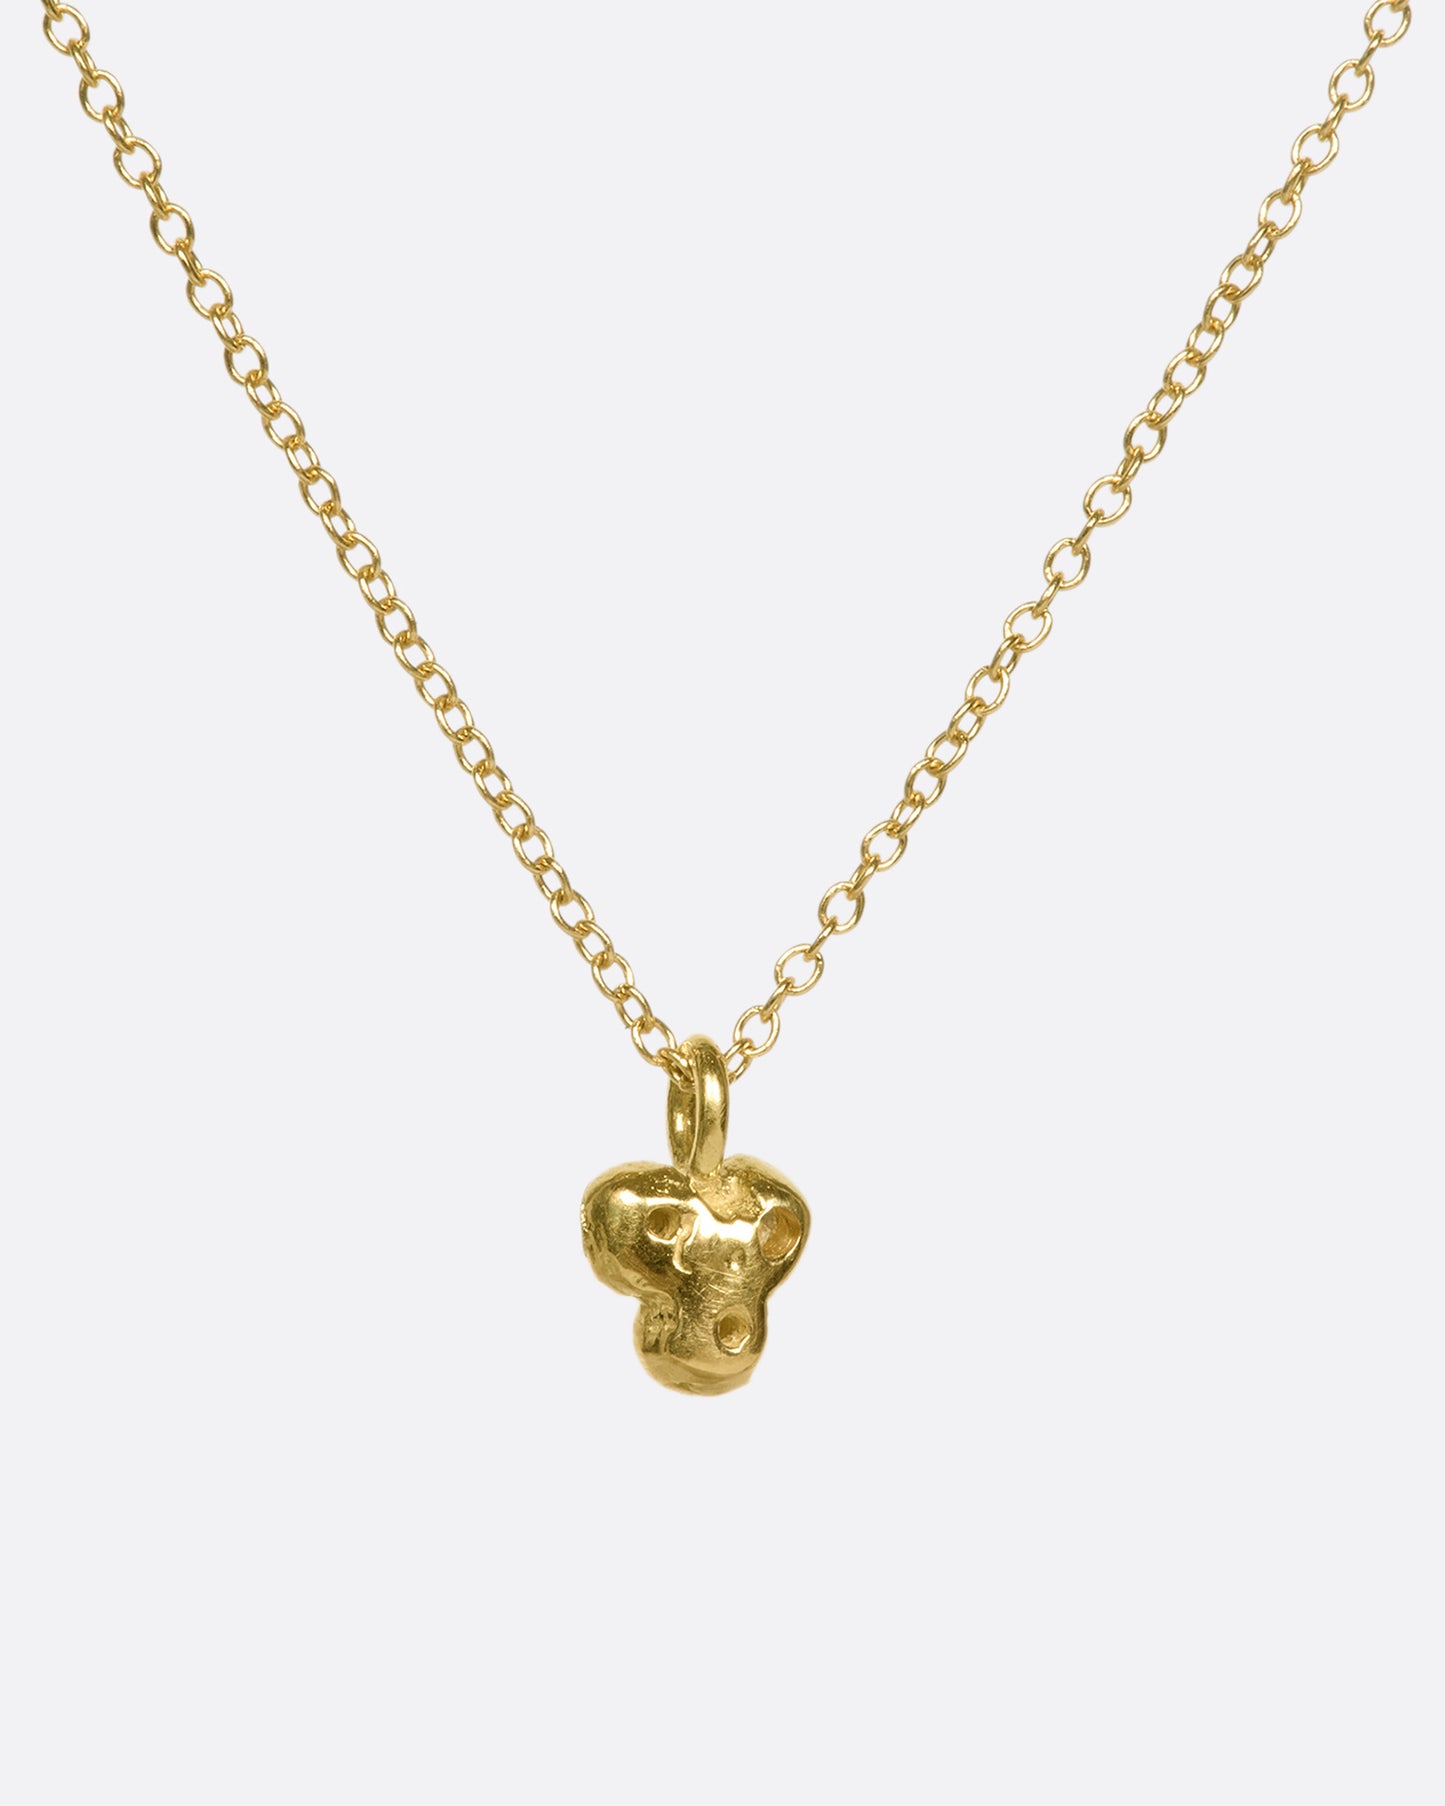 A dainty 18k gold and diamond pendant swinging on a fine gold chain